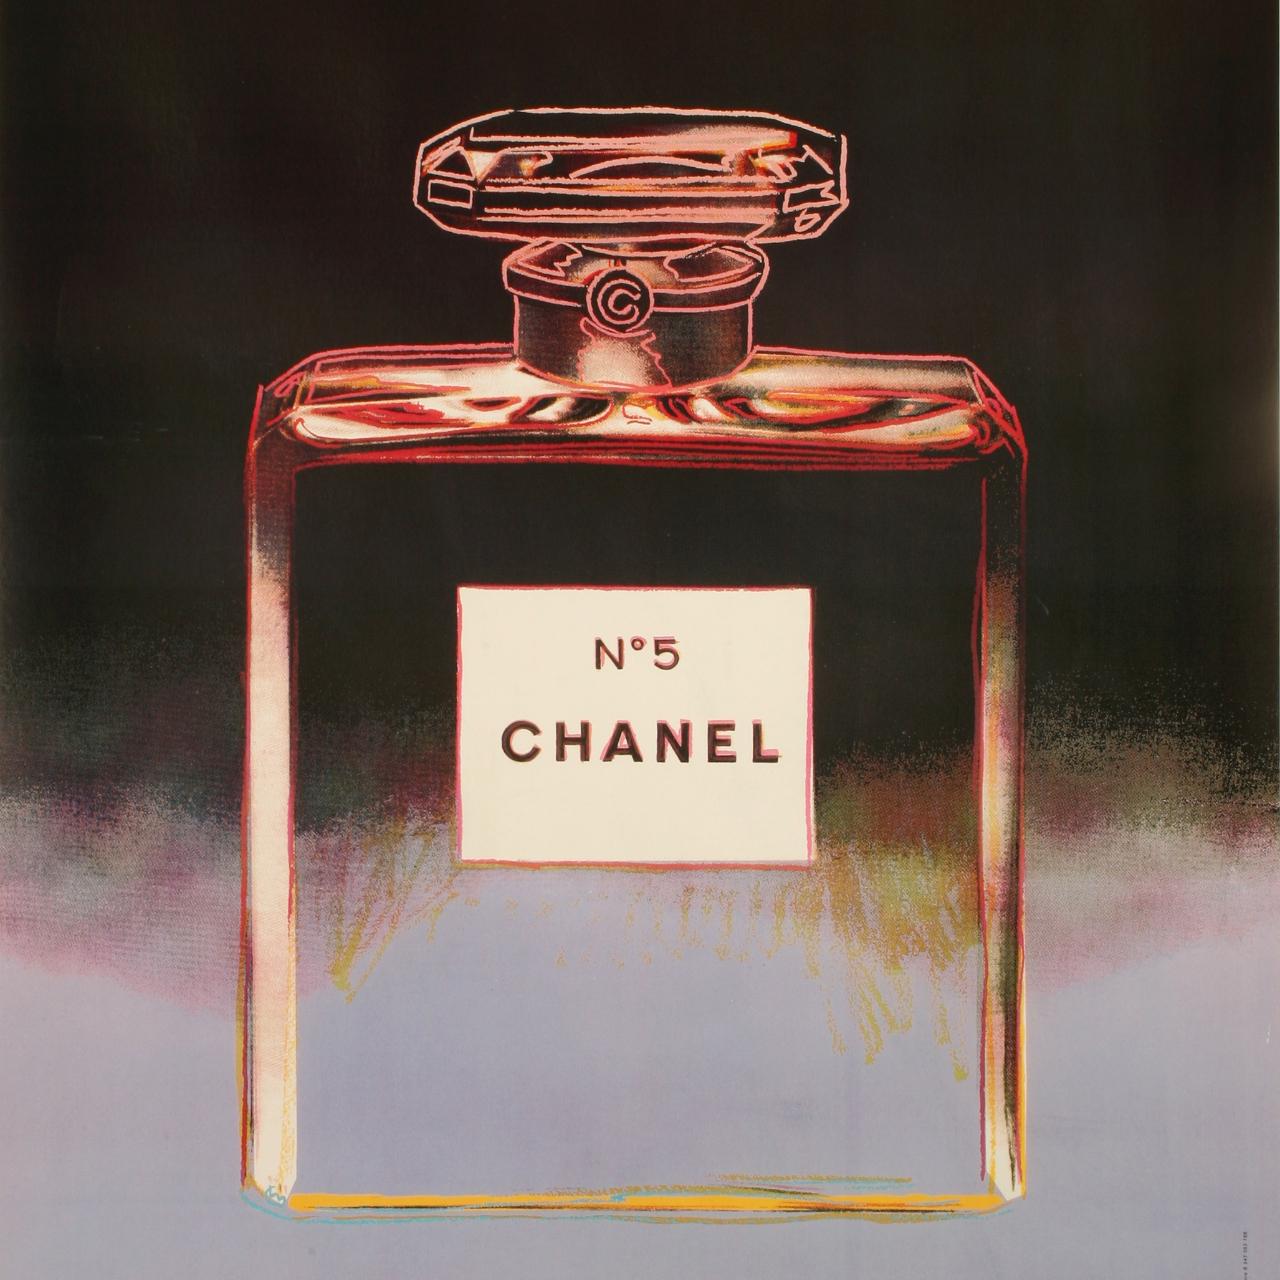 Original Pop Art Poster by Andy Warhol for Chanel No. 5 Perfum from 1997

Artist: Andy Warhol
Title: Chanel N°5 – Black - Purple
Date: 1997
Size: 46.1 x 66.9 in / 117 x 170 cm
Materials and Techniques: Colour lithograph on paper
Linen backing: